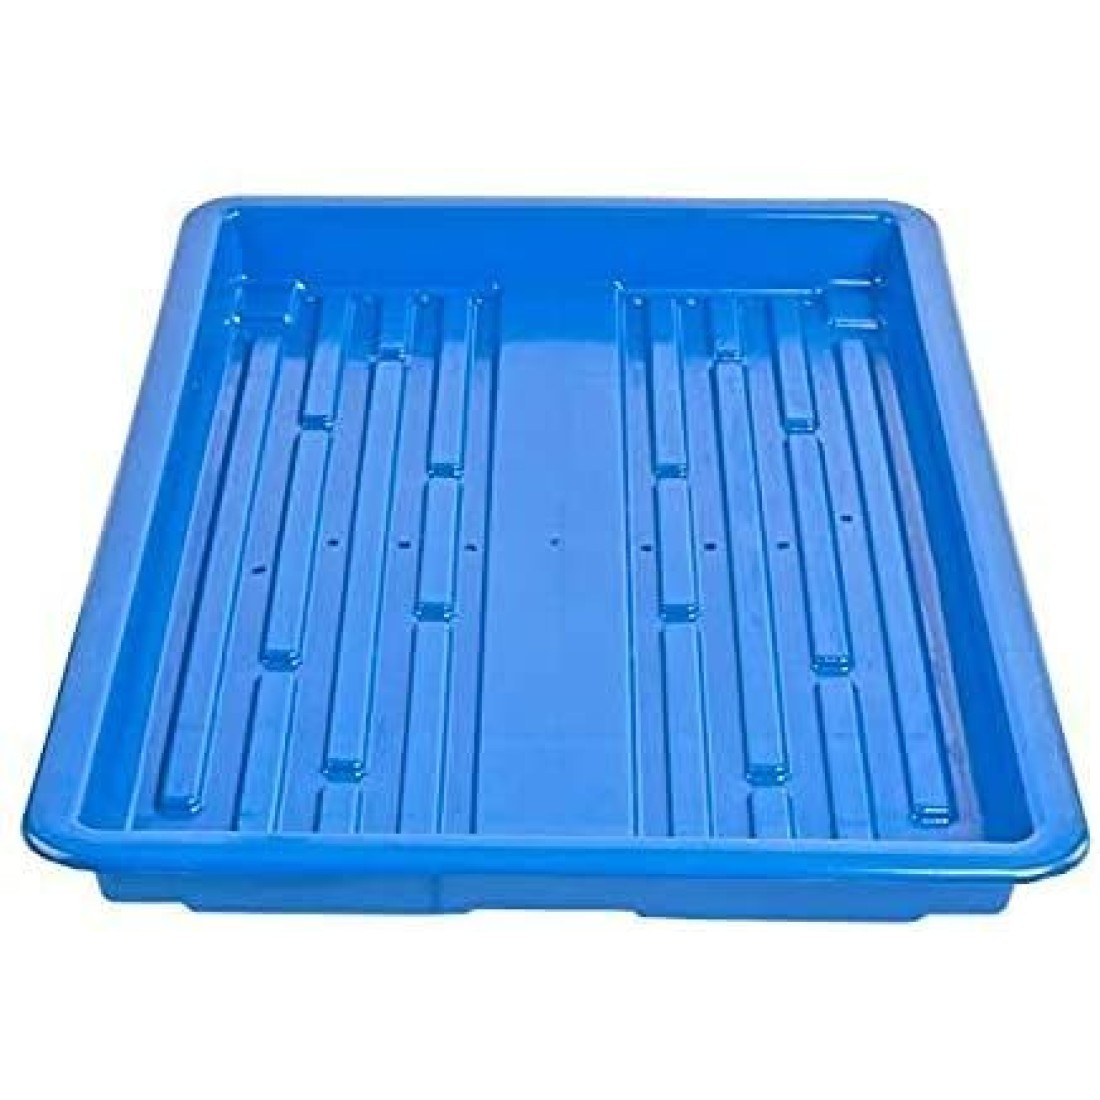 Hydroponics Germination Plastic Tray for Fodder Maize/microgreens/Seedling/Wheatgrass (Blue), 5 Pieces 2